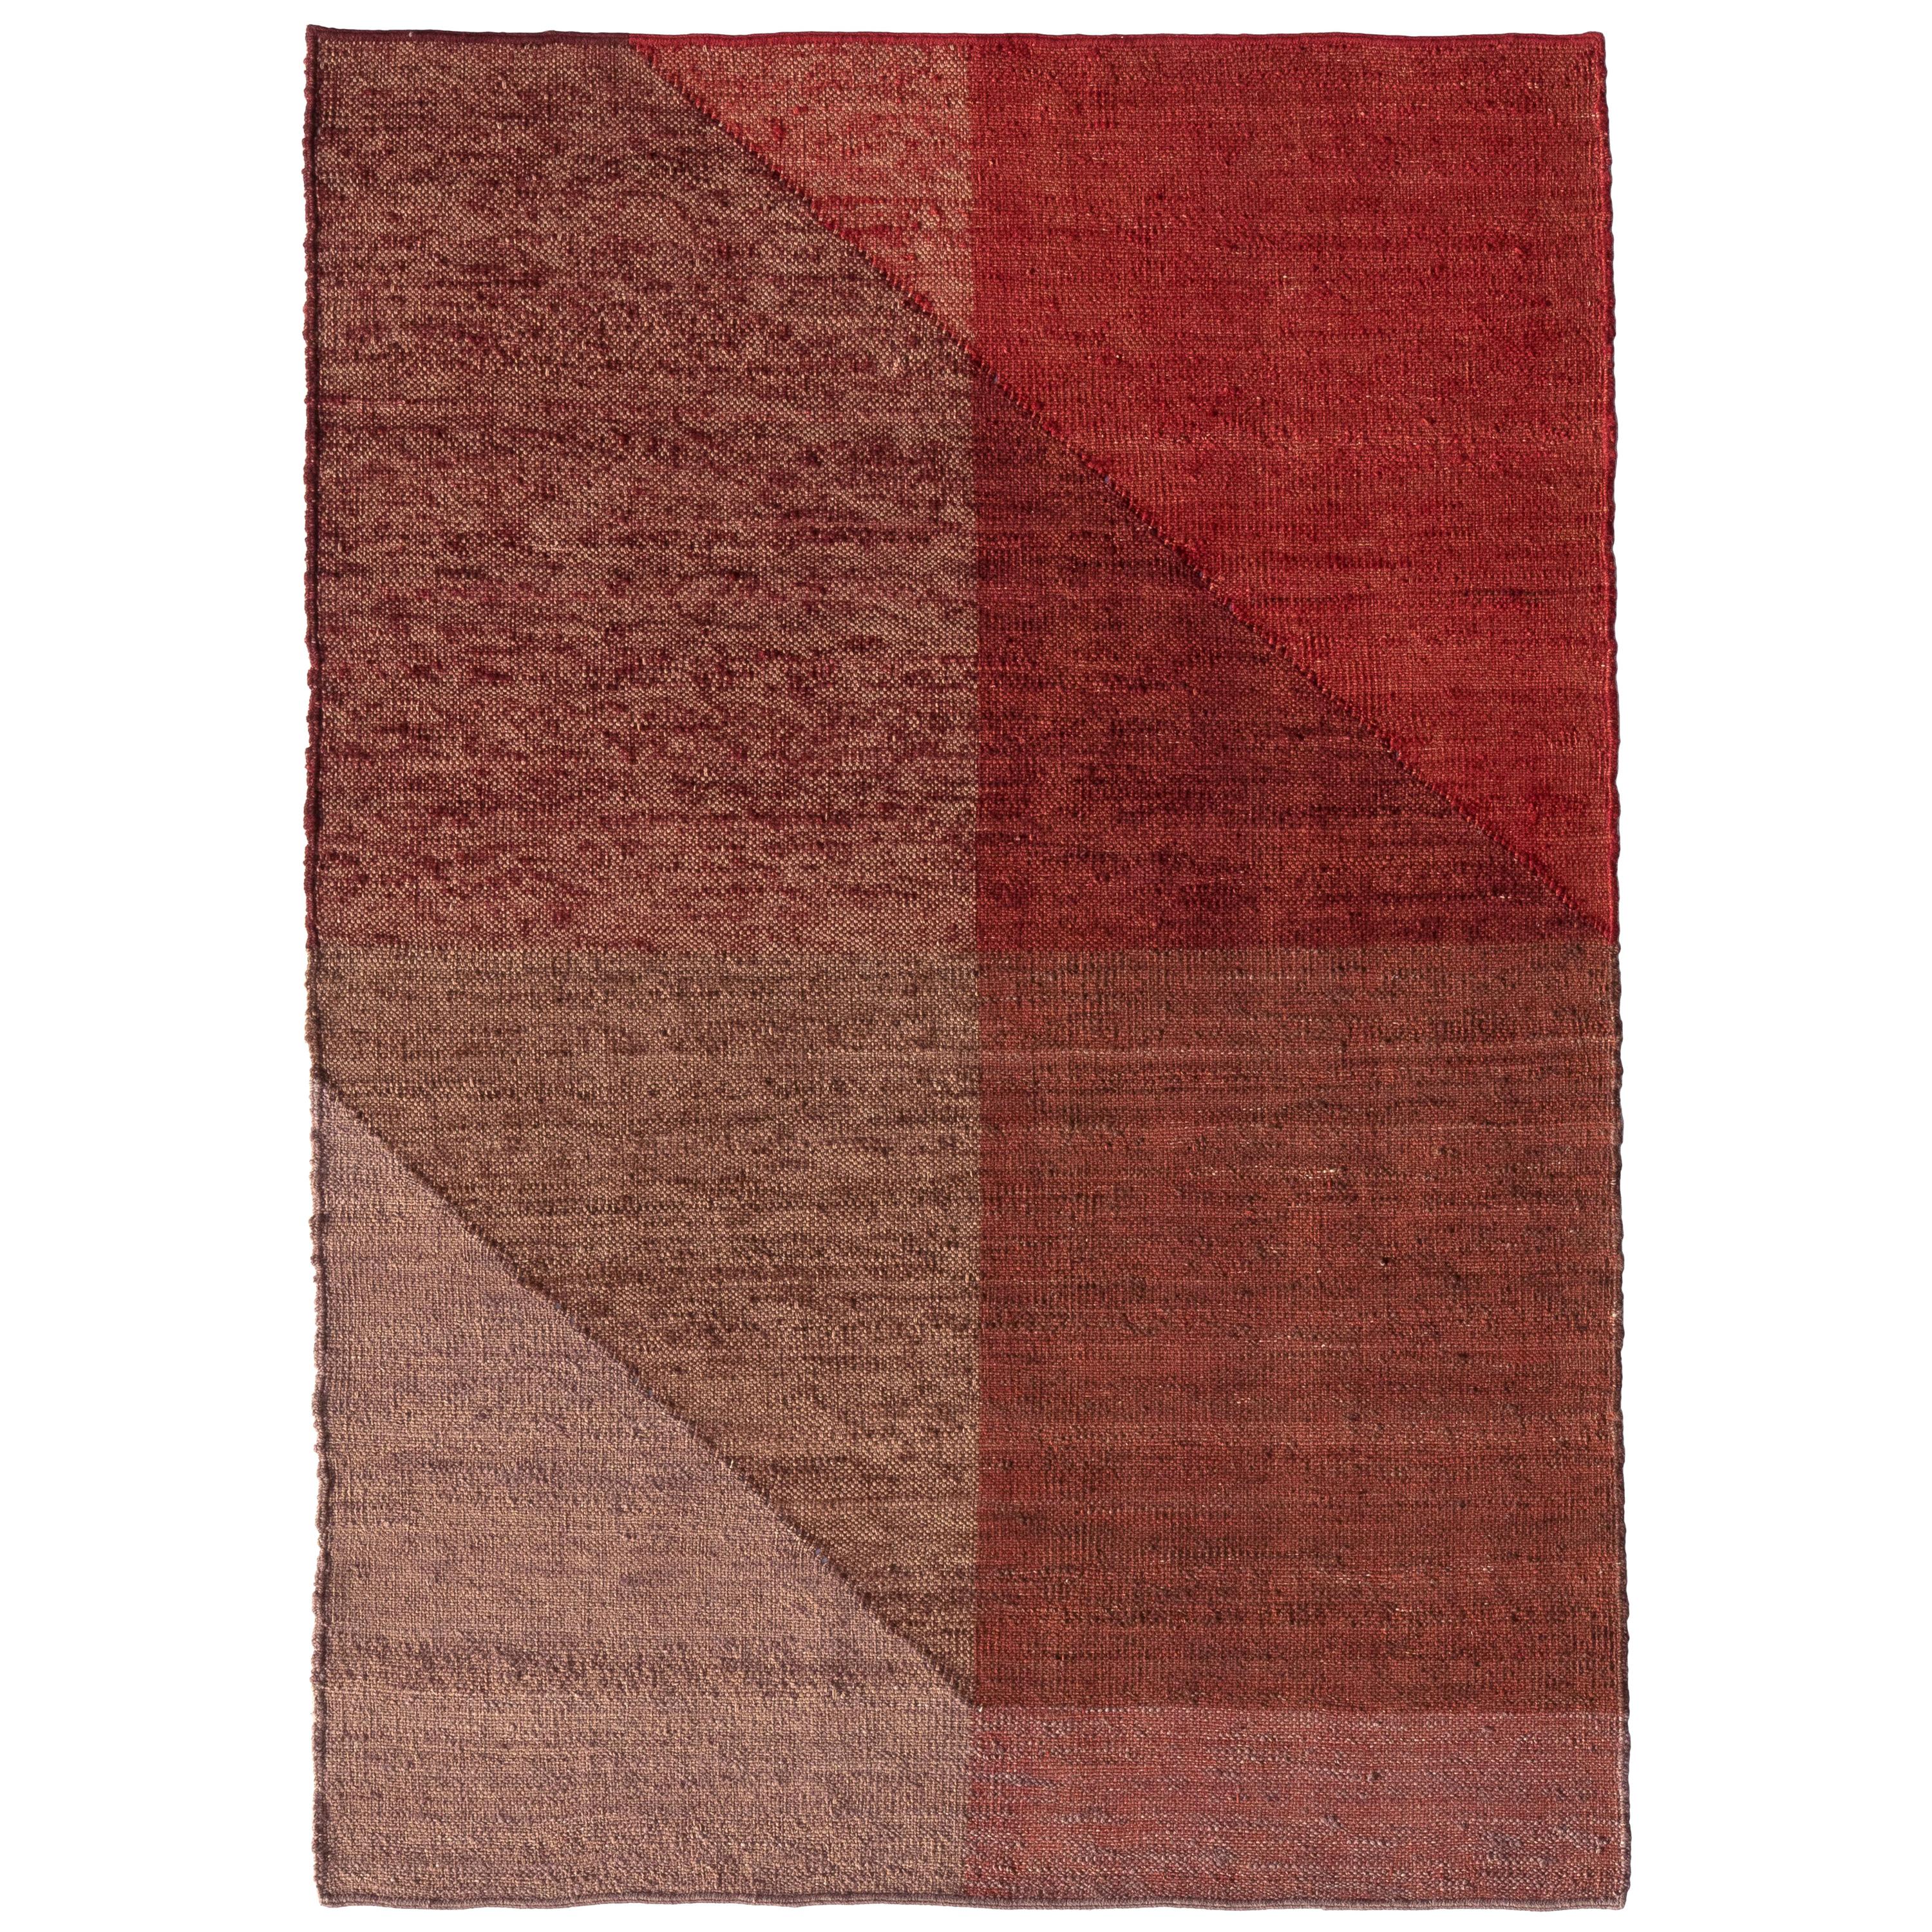 Nanimarquina Capas 1 Standard Rug in Red by Mathias Hahn, Small For Sale